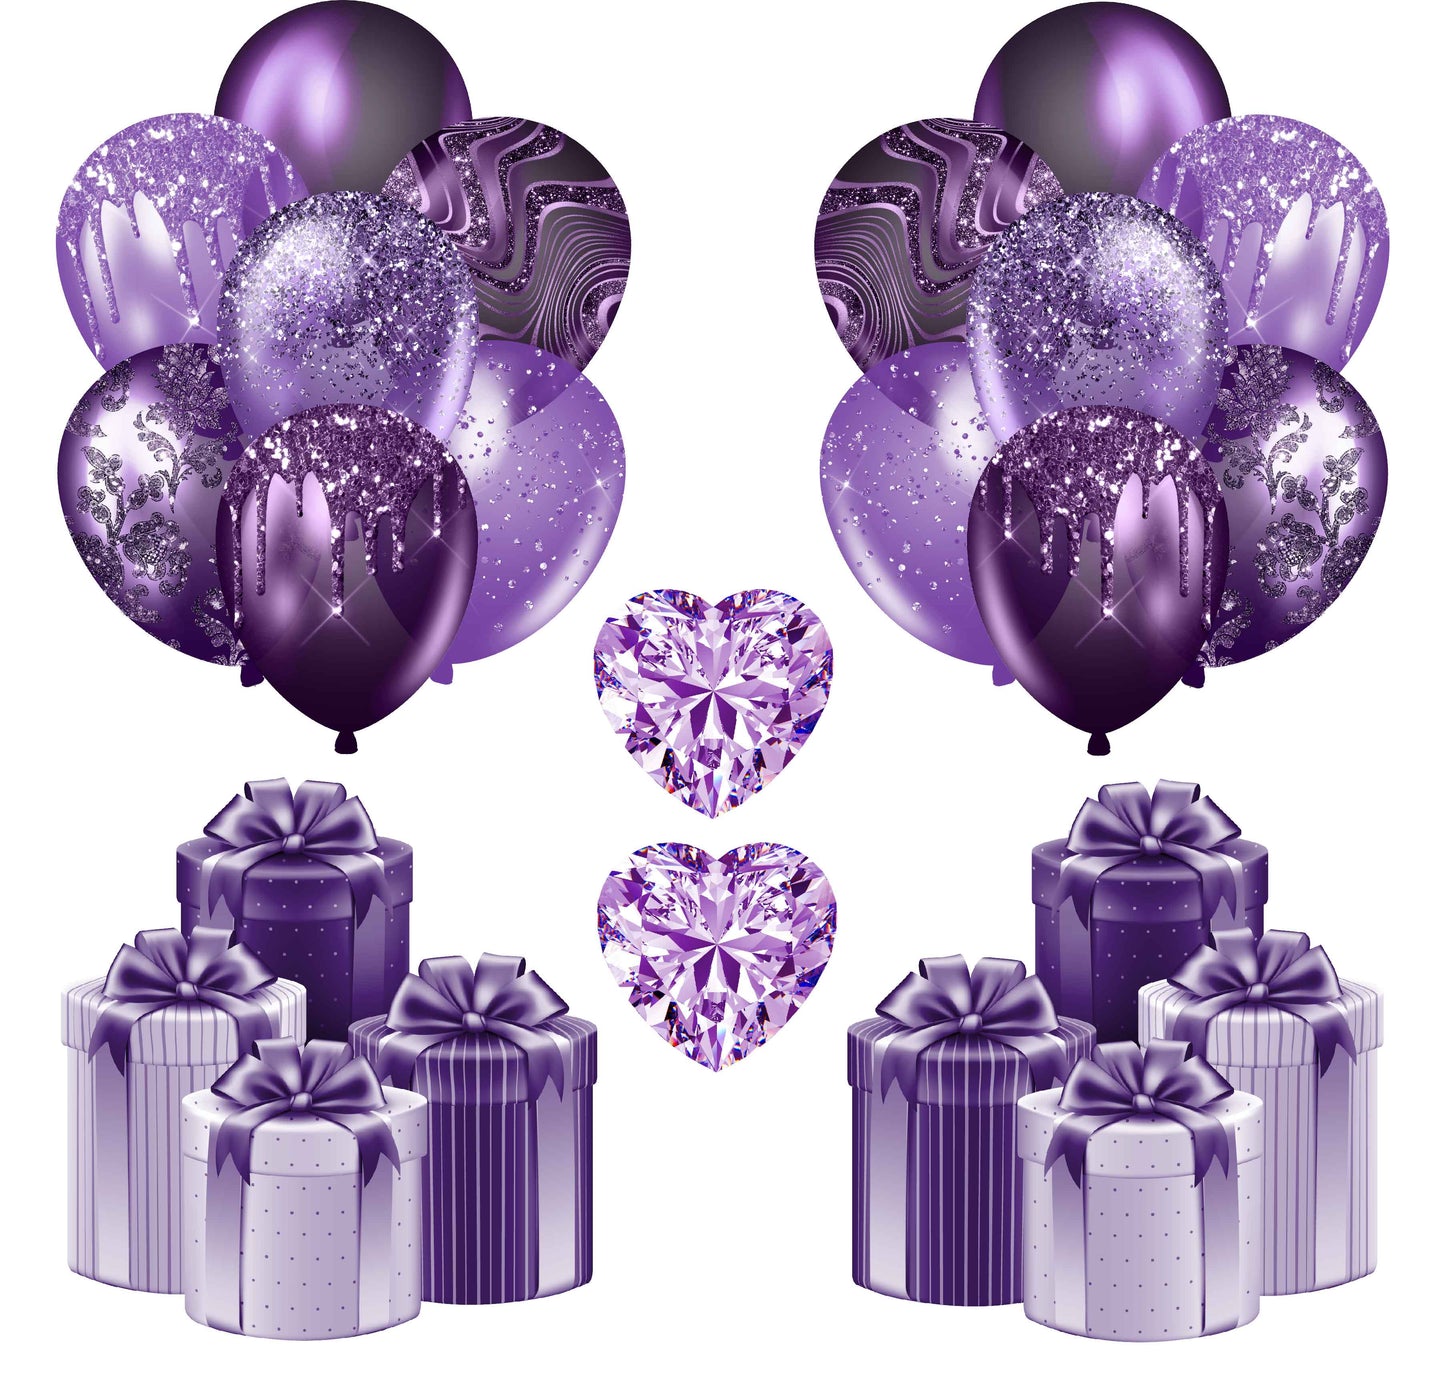 Purple Balloons and Presents Half Sheet  (Must Purchase 2 Half sheets - You Can Mix & Match)